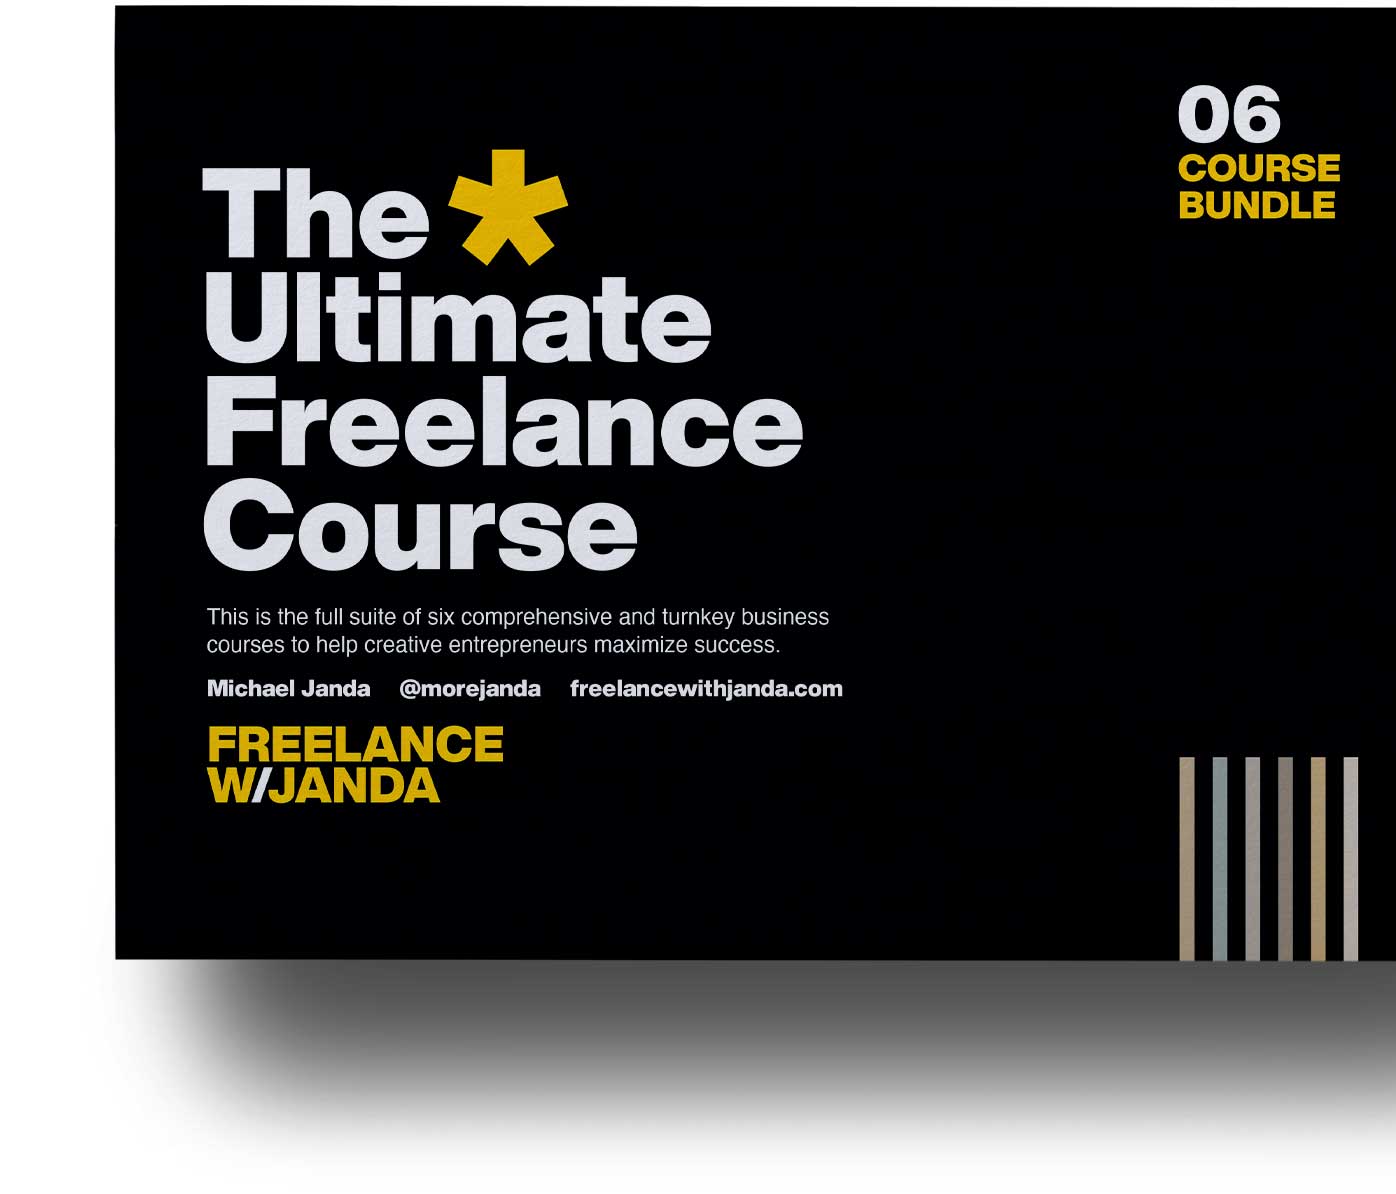 [SUPER HOT SHARE] Michael Janda – The Ultimate Freelance Course Download